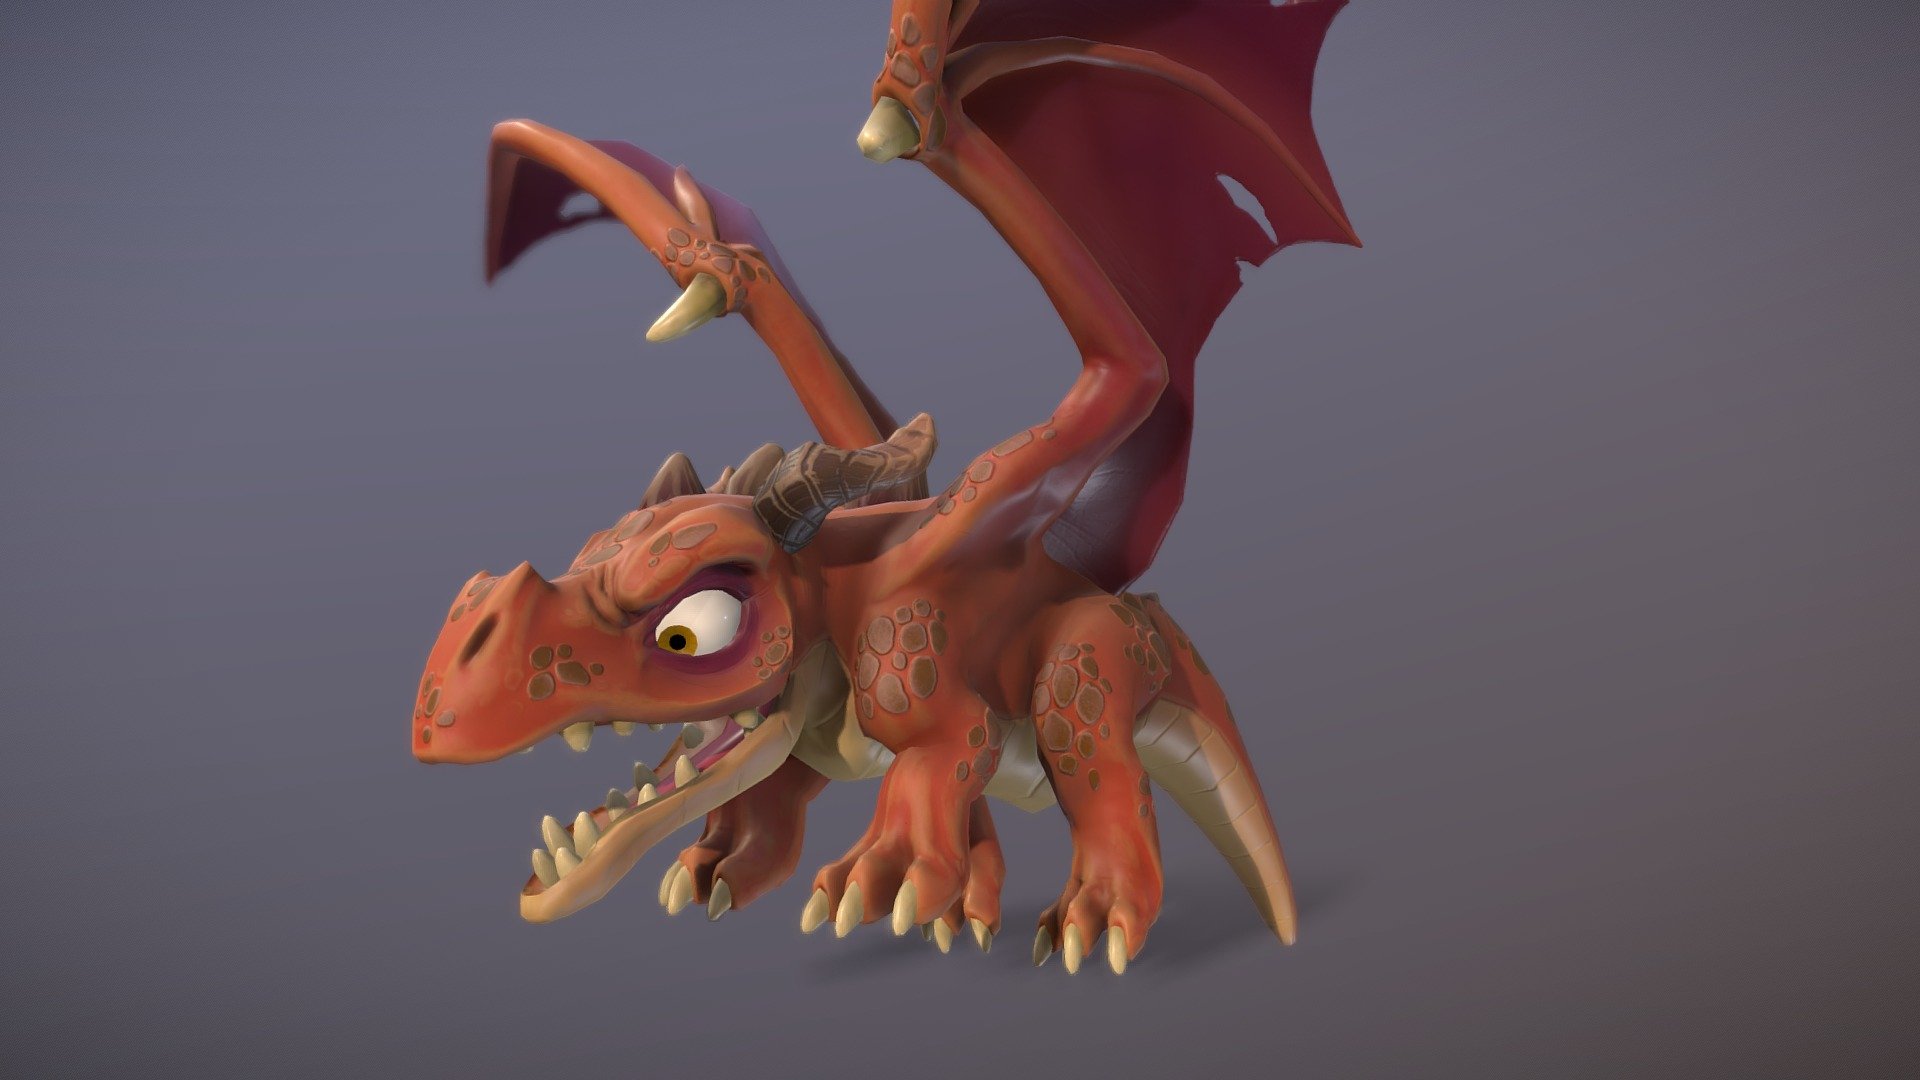 The drake is one of the enemy characters made for our upcoming game KnightOut. It will fly in and attack your castle with fire attacks. It was a challenge to design a dragon that looked evil, but not too evil and would fit into the stylized cartoony visuals. The game is going to come out on Nintendo Switch and on Steam for PC 3d model